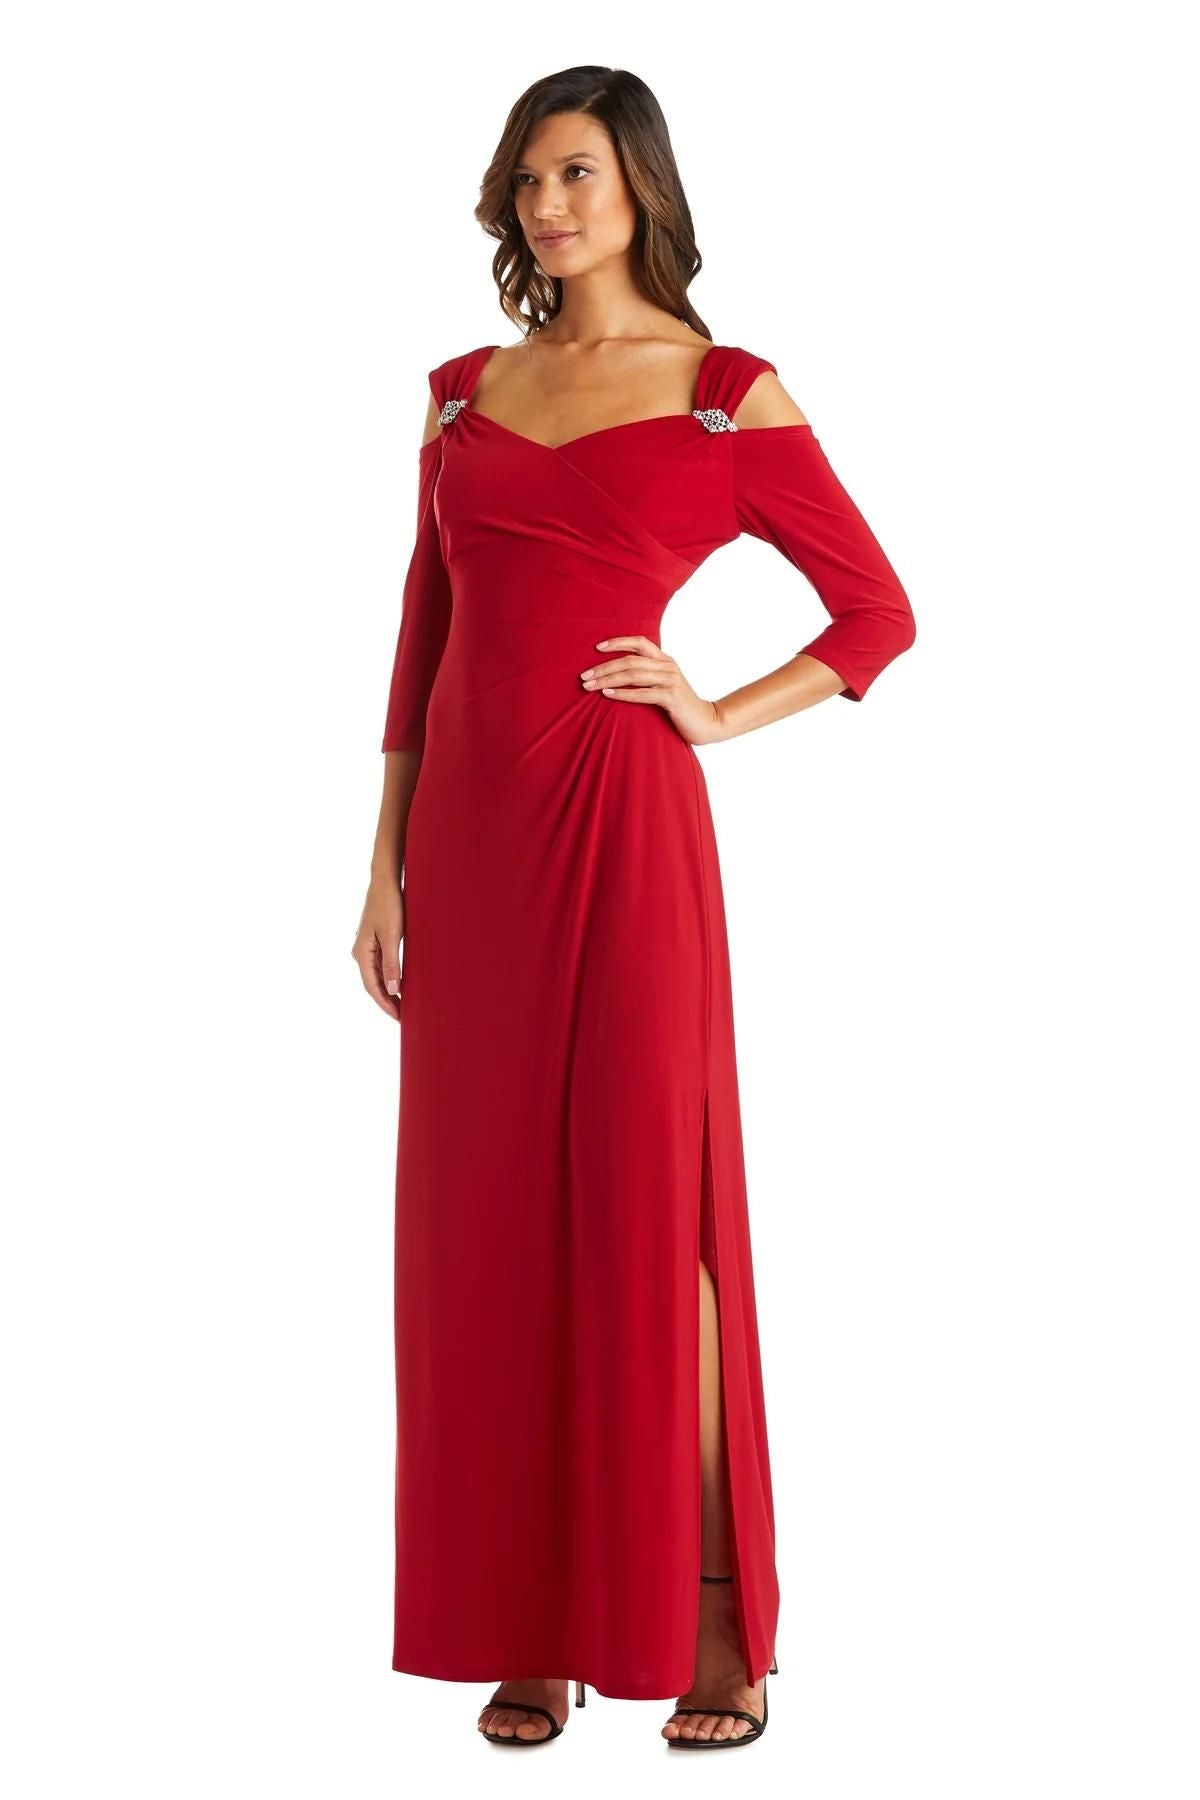 R&M Richards Women's Empire Waist Cold Shoulder Dress with Sleeves- Evening  Gown